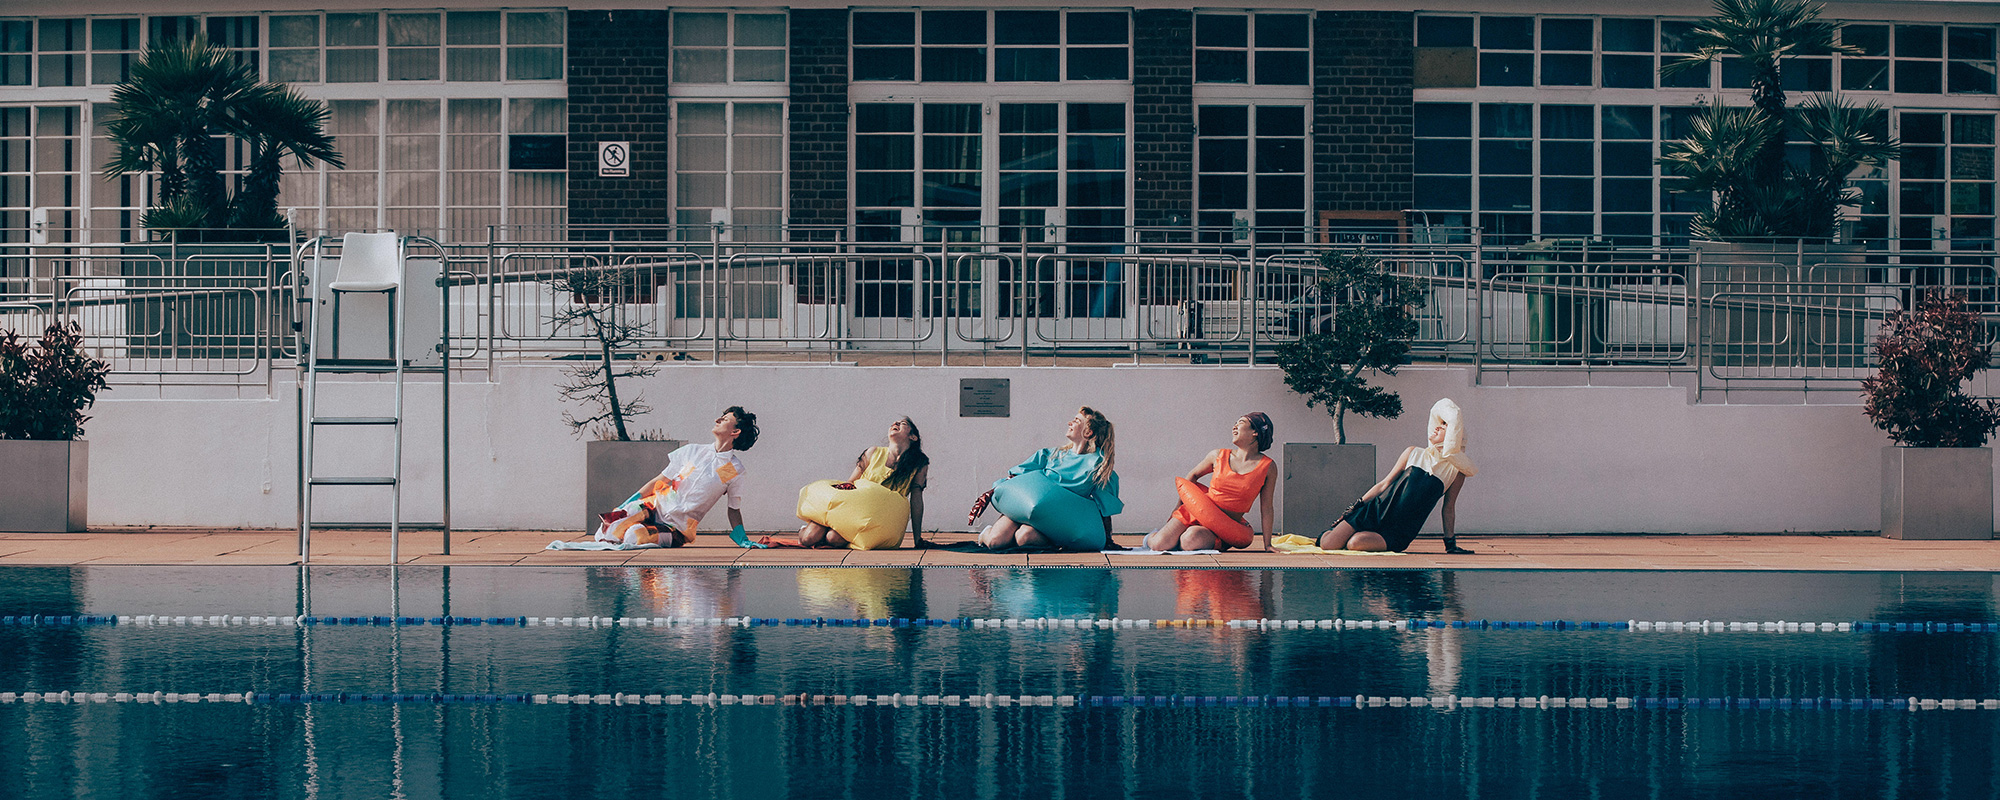 5 adults pose in brightly coloured outfits by an outdoor swimming pool